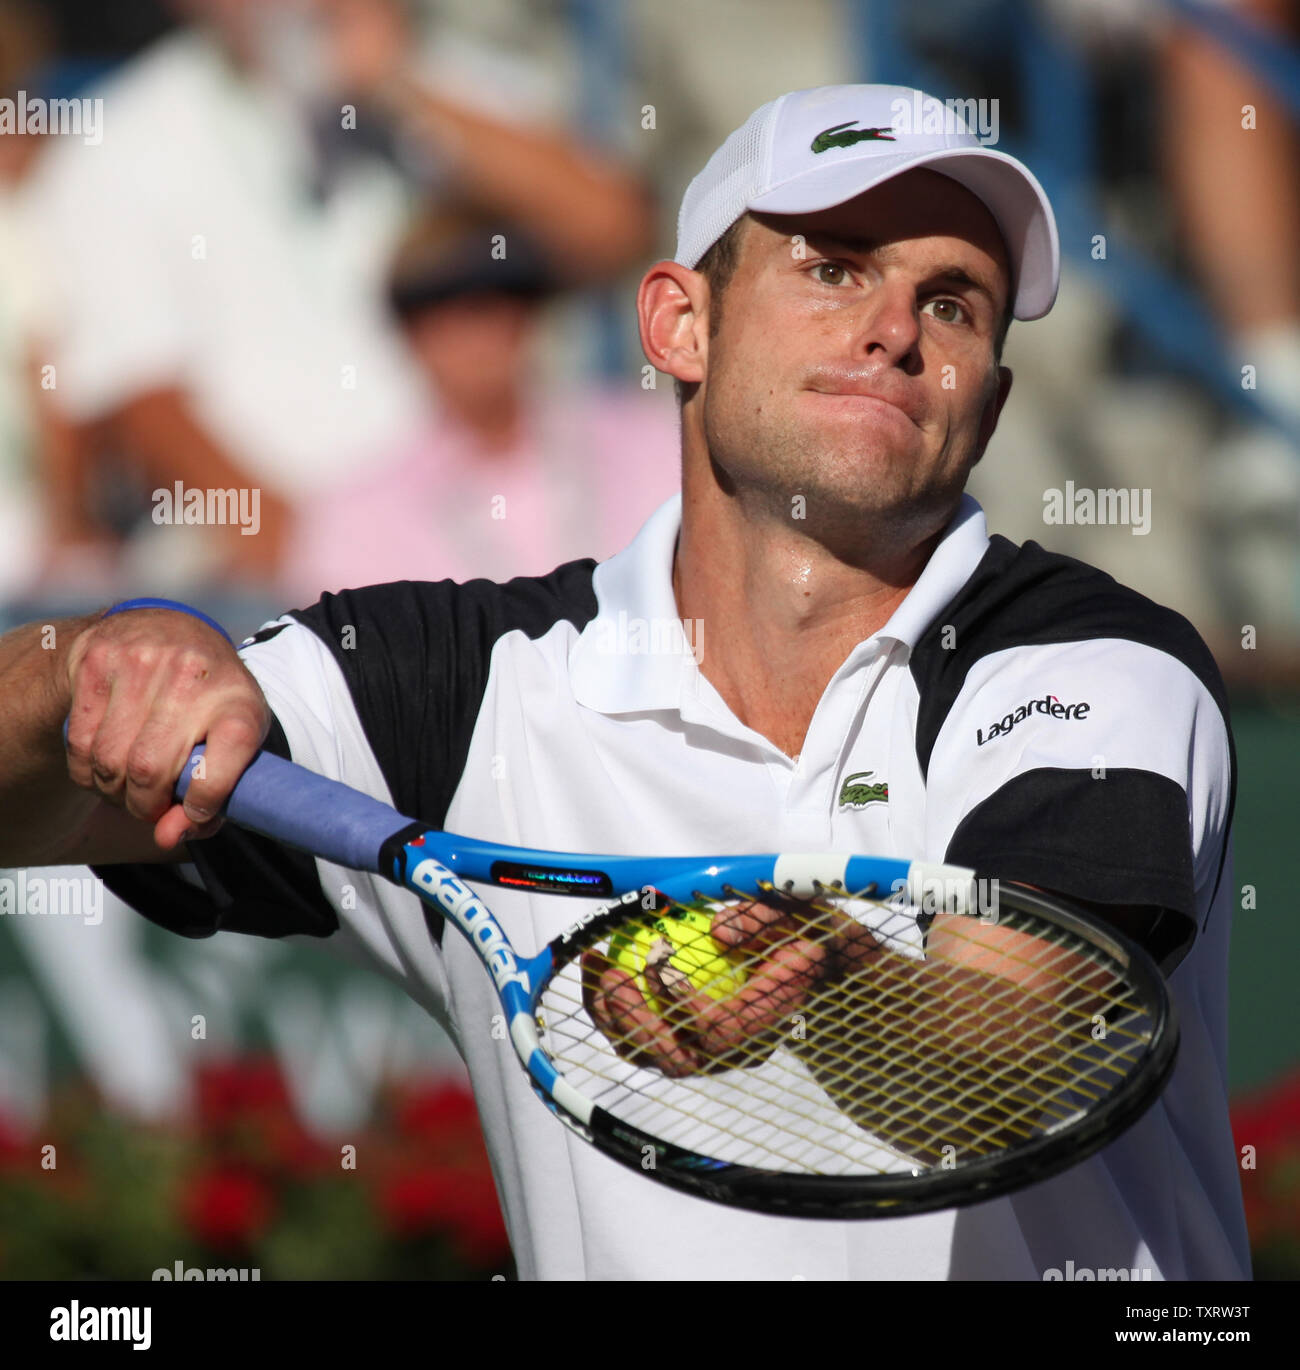 American Andy Roddick prepares to serve during his semi-final match with Spaniard Rafael Nadal during the BNP Paribas Open in Indian Wells, California on March 21, 2009.   Nadal advanced to the tournament finals with a 6-4, 7-6 (4) victory.  (UPI Photo/ David Silpa) Stock Photo